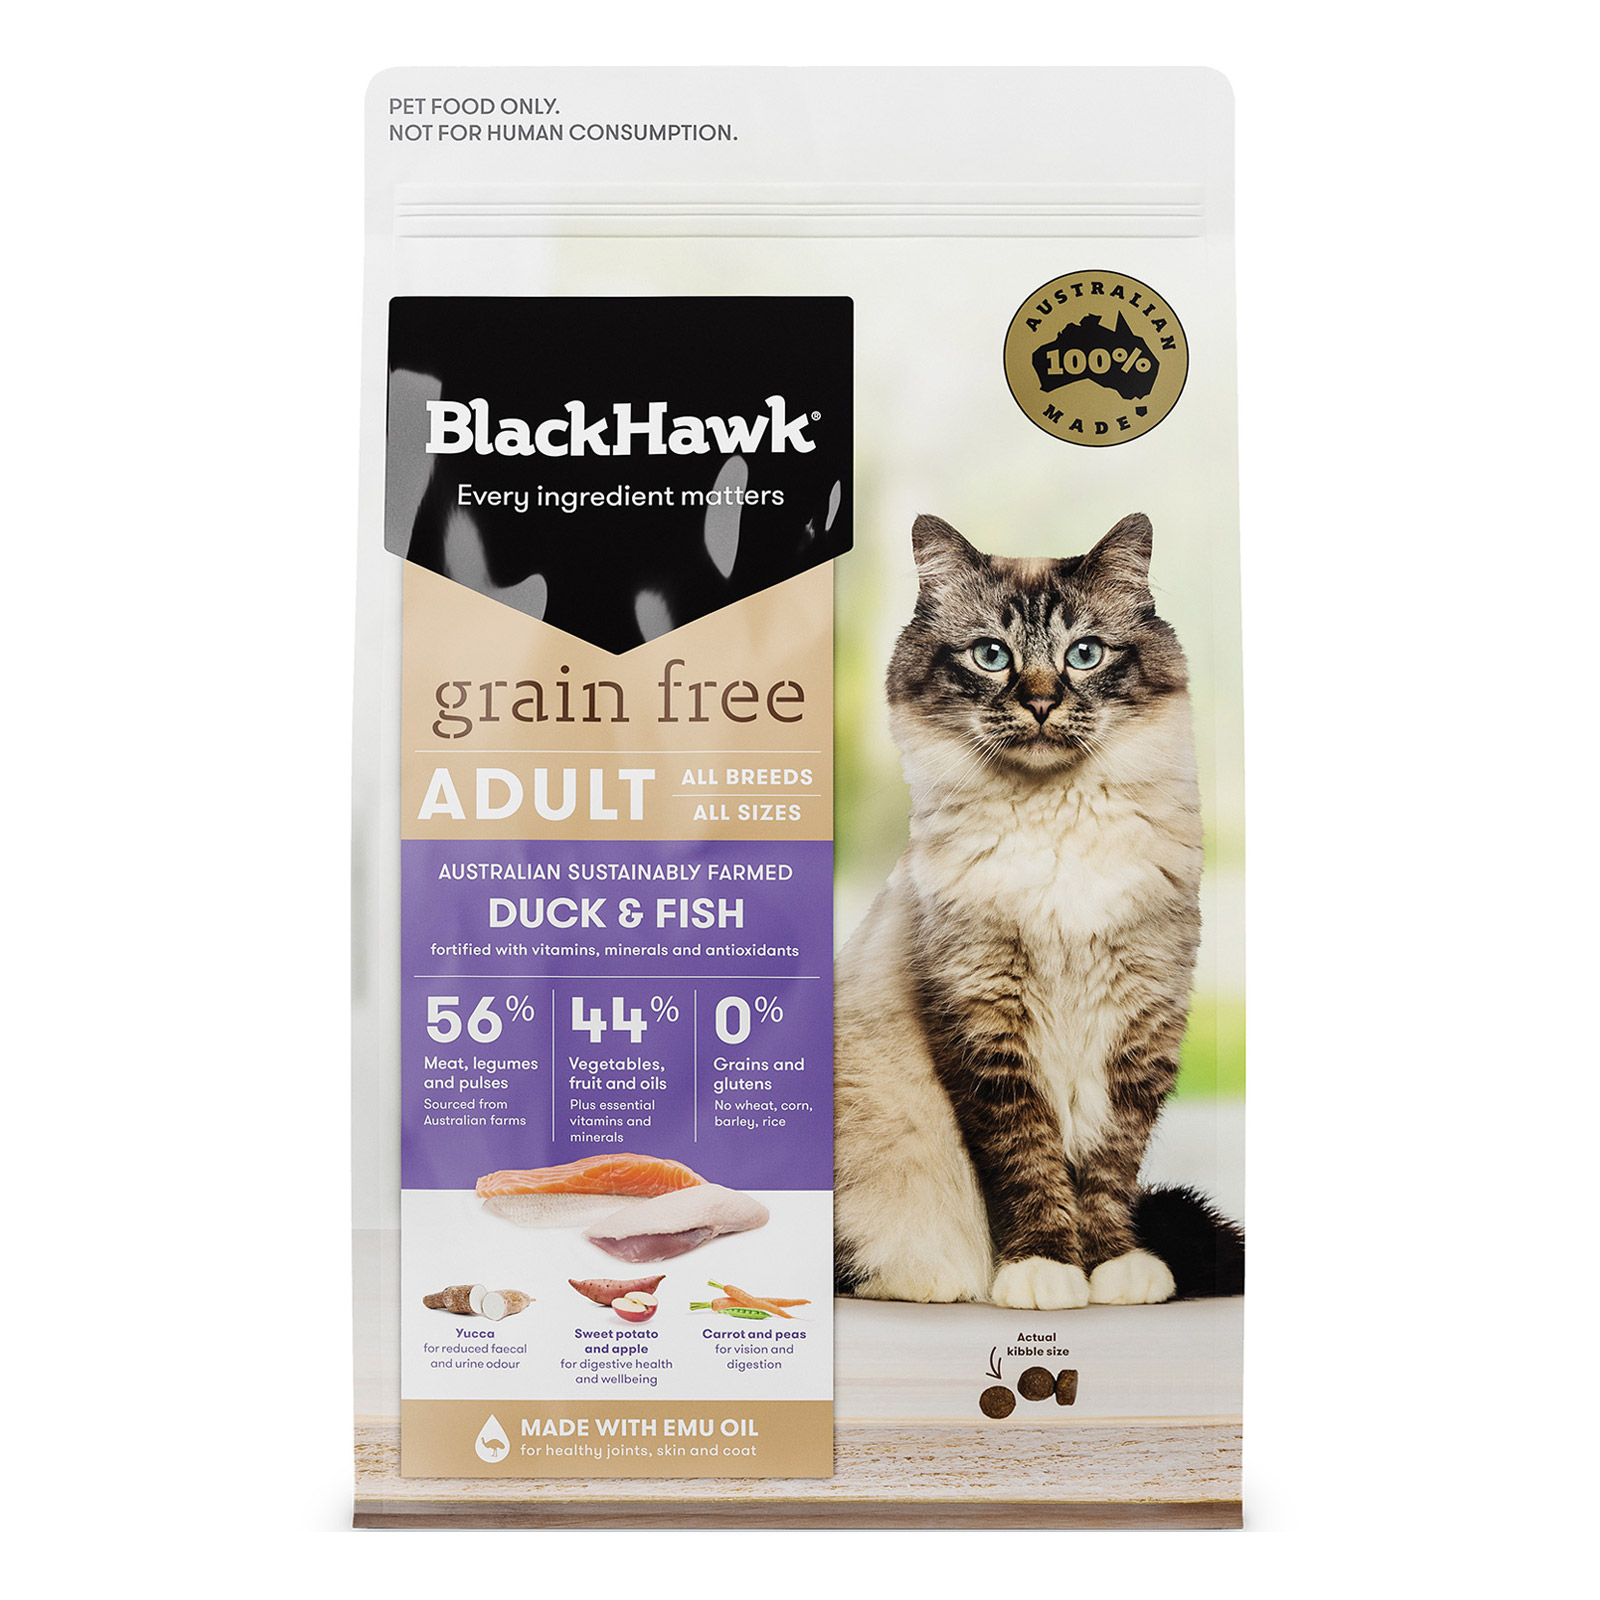 Black Hawk Grain Free Duck and Fish Adult Dry Cat Food for Food